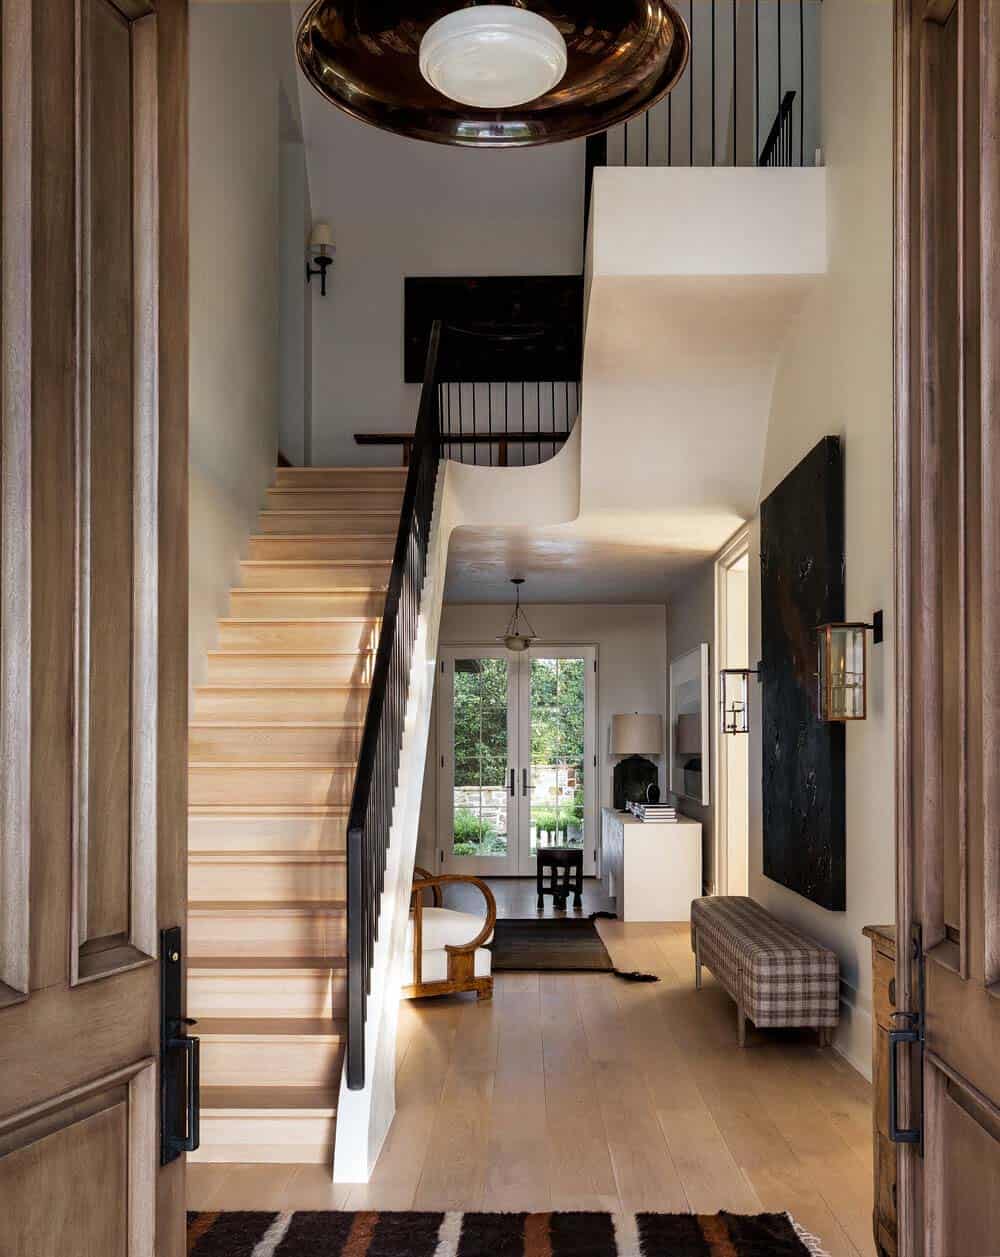 modern rustic villa entry with a view of the staircase